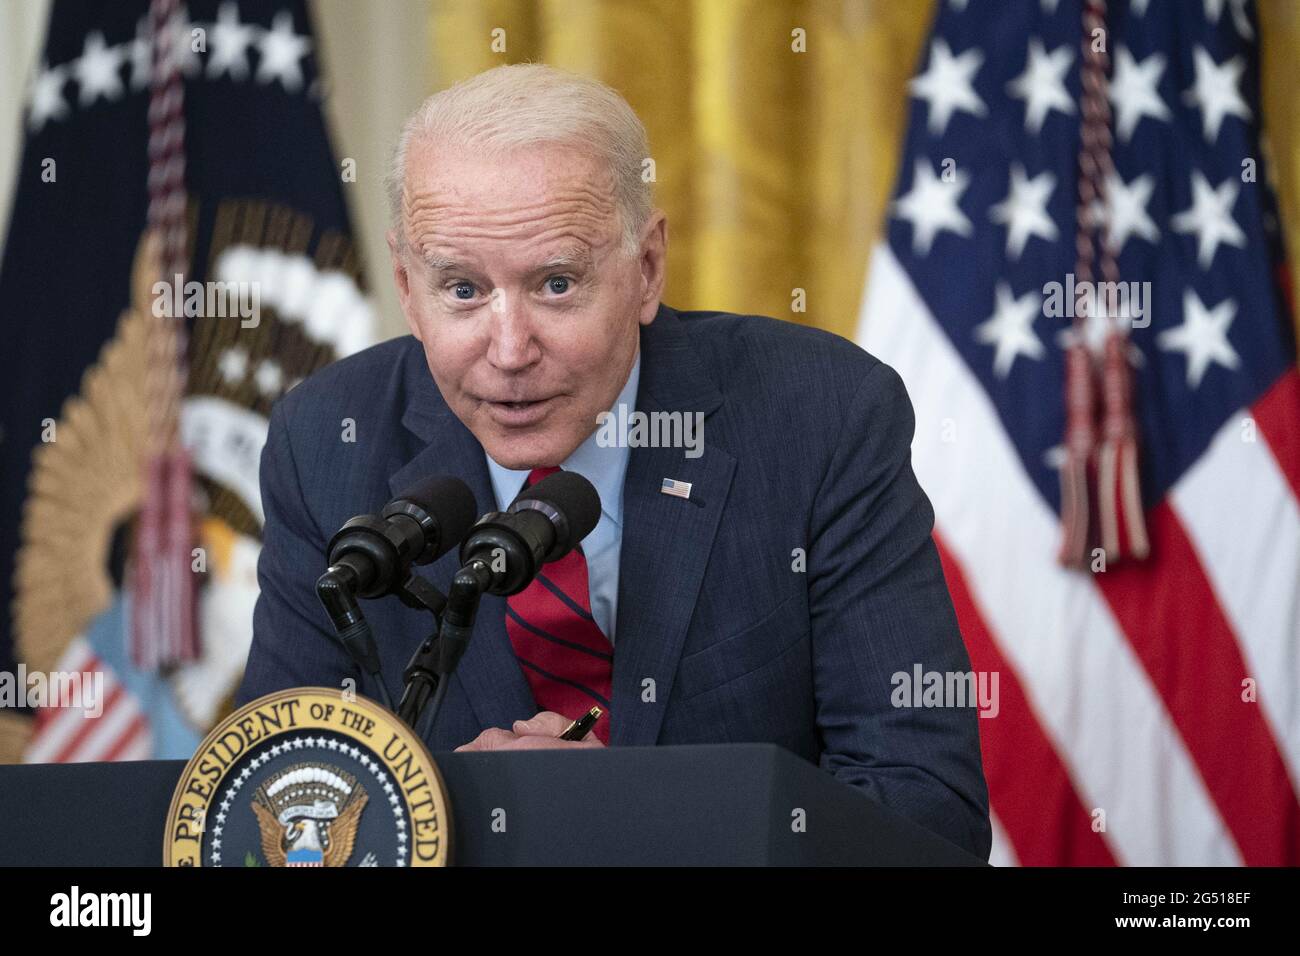 Washington, United States. 24th June, 2021. President Joe Biden delivers remarks on deals made by a bipartisan group of Senators on the infrastructure plan in the East Room of the White House in Washington, DC, on Thursday, June 24, 2021. Photo by Sarah Silbiger/UPI Credit: UPI/Alamy Live News Stock Photo